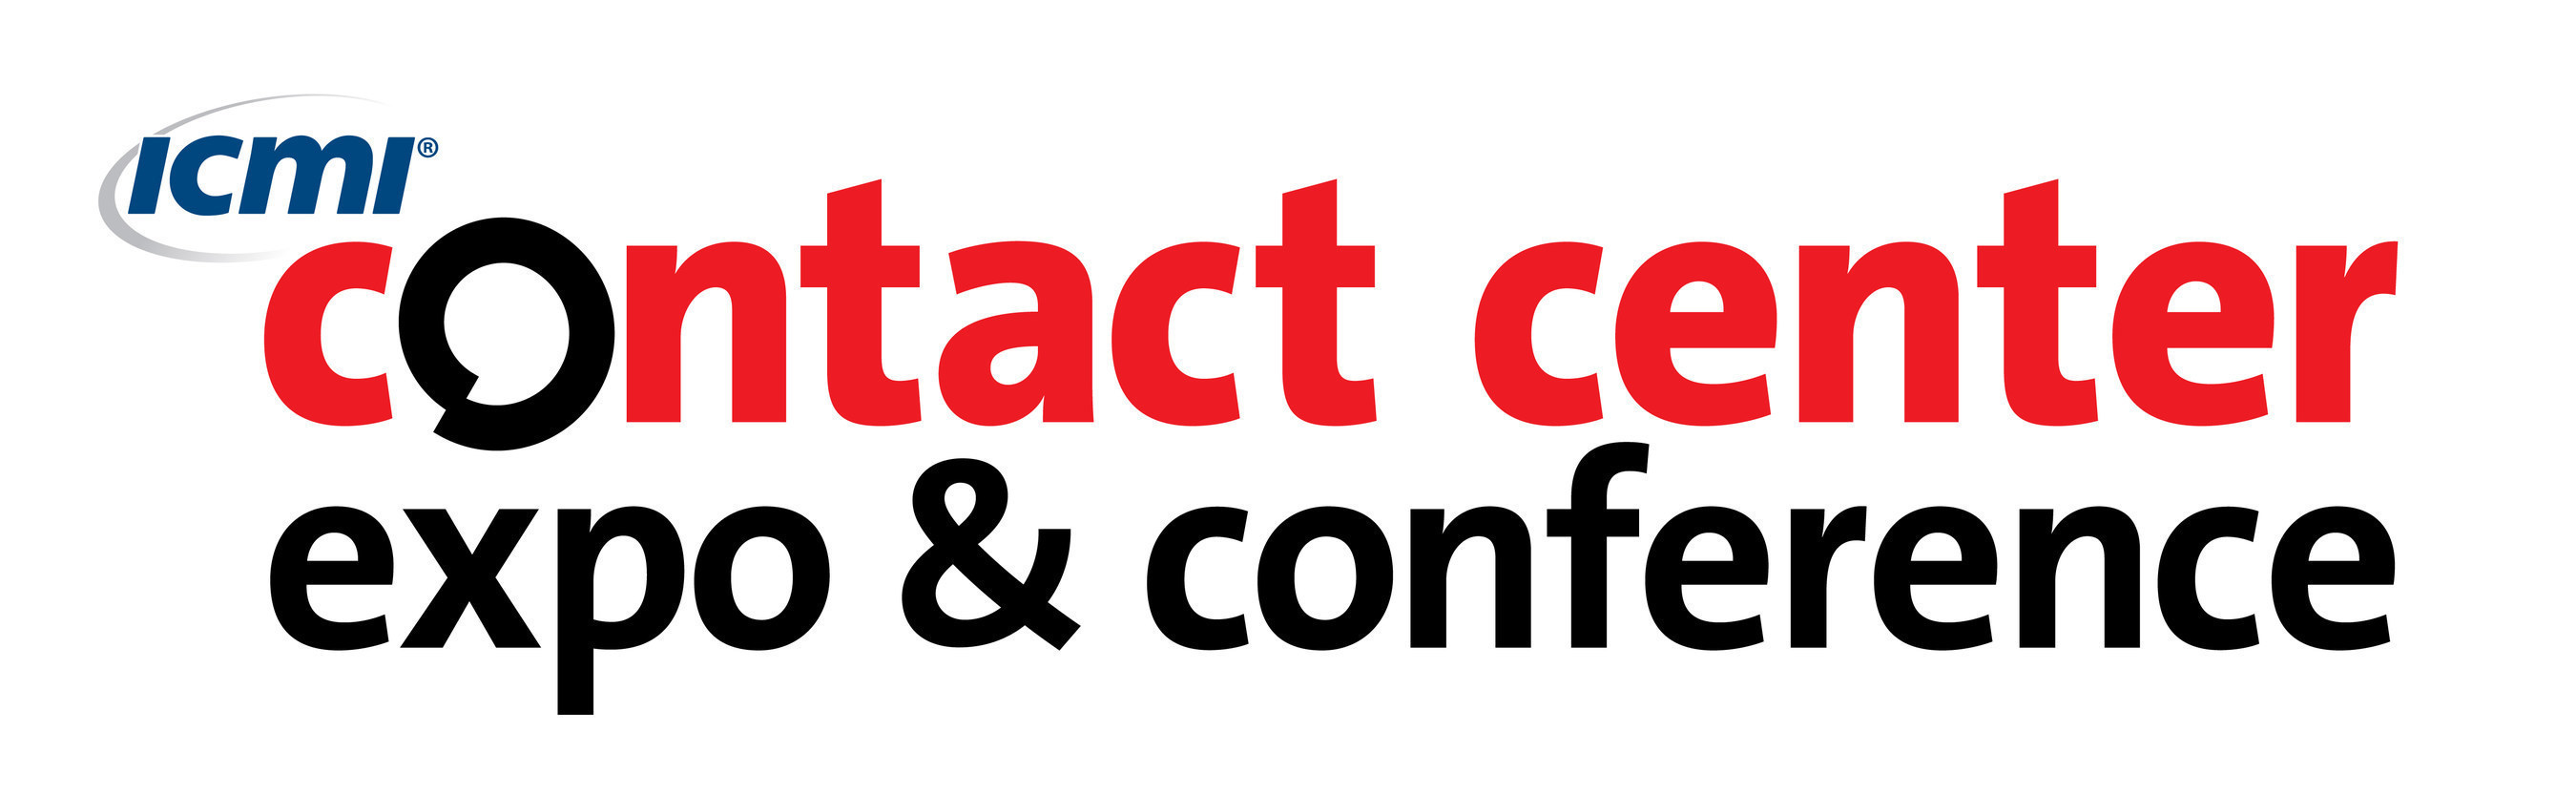 The 2015 Contact Center Expo & Conference will take place May 4-7 at the Walt Disney World Dolphin Resort in Lake Buena Vista, Florida.